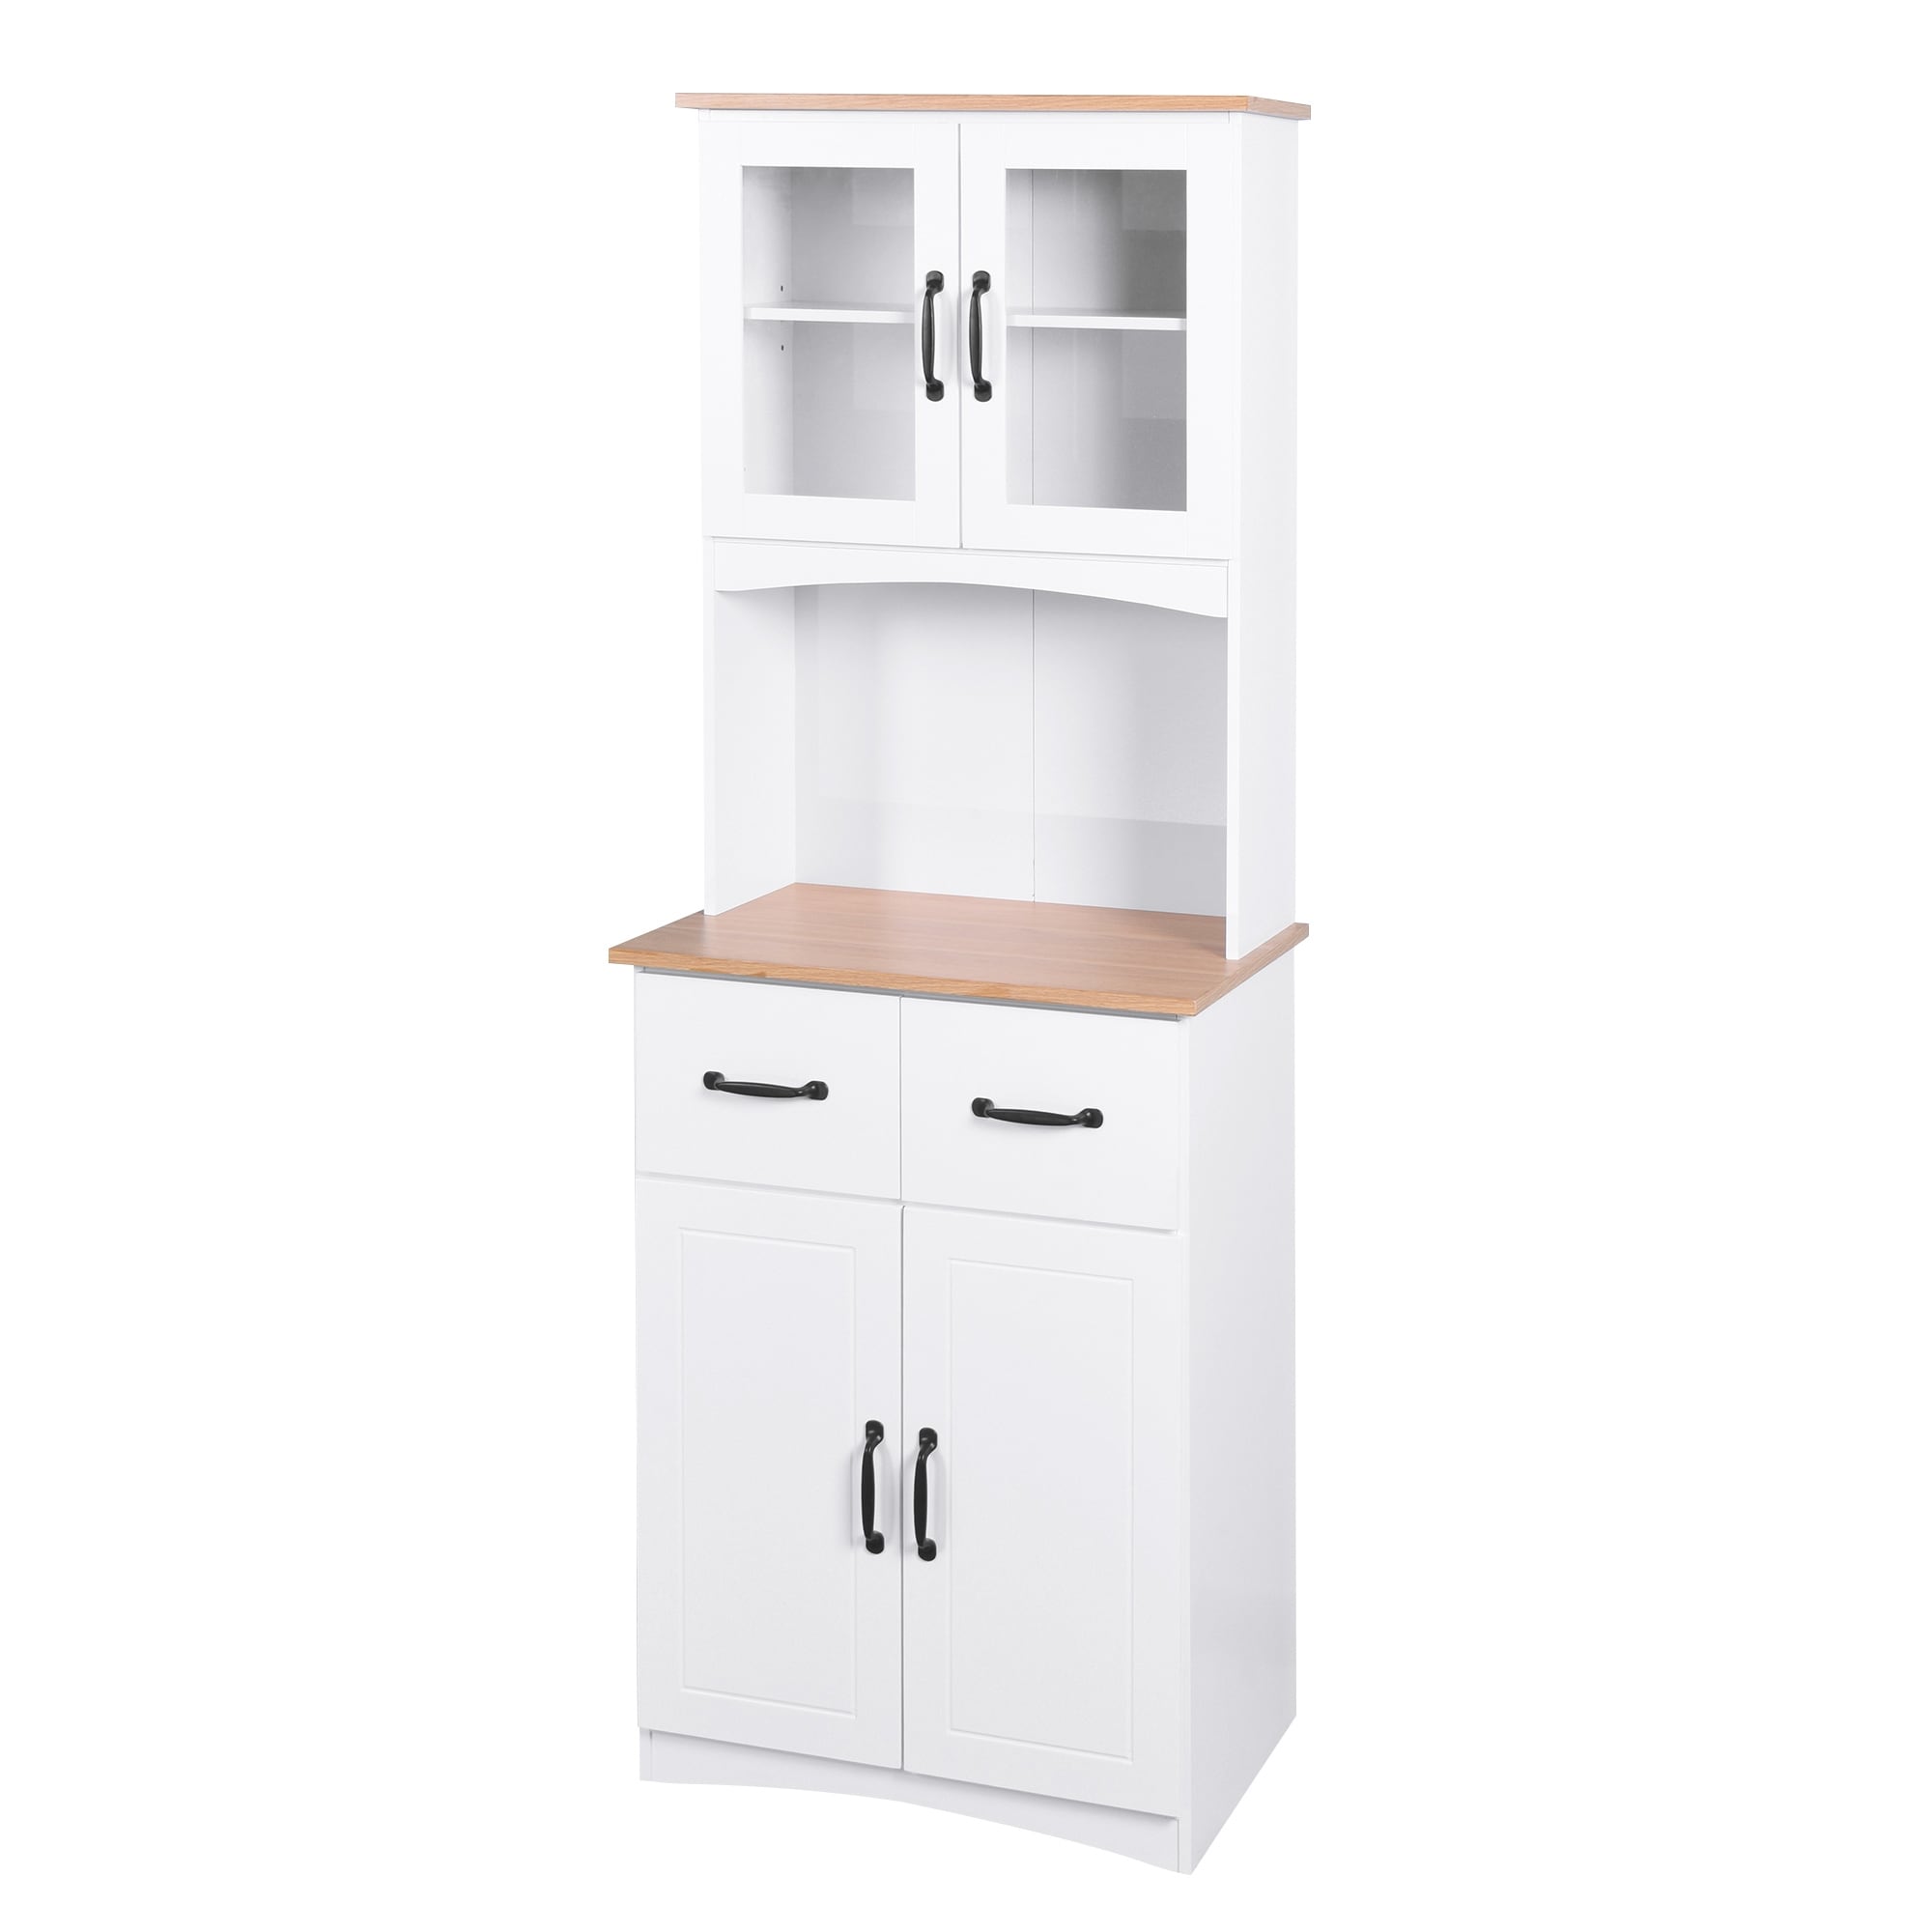 https://ak1.ostkcdn.com/images/products/is/images/direct/5ca4efa60f24138779156d205d8f5a8db1b1a4a0/Kitchen-Cabinet-White-Pantry-Room-Storage-Microwave-Cabinet-with-Framed-Glass-Doors-and-Drawer.jpg